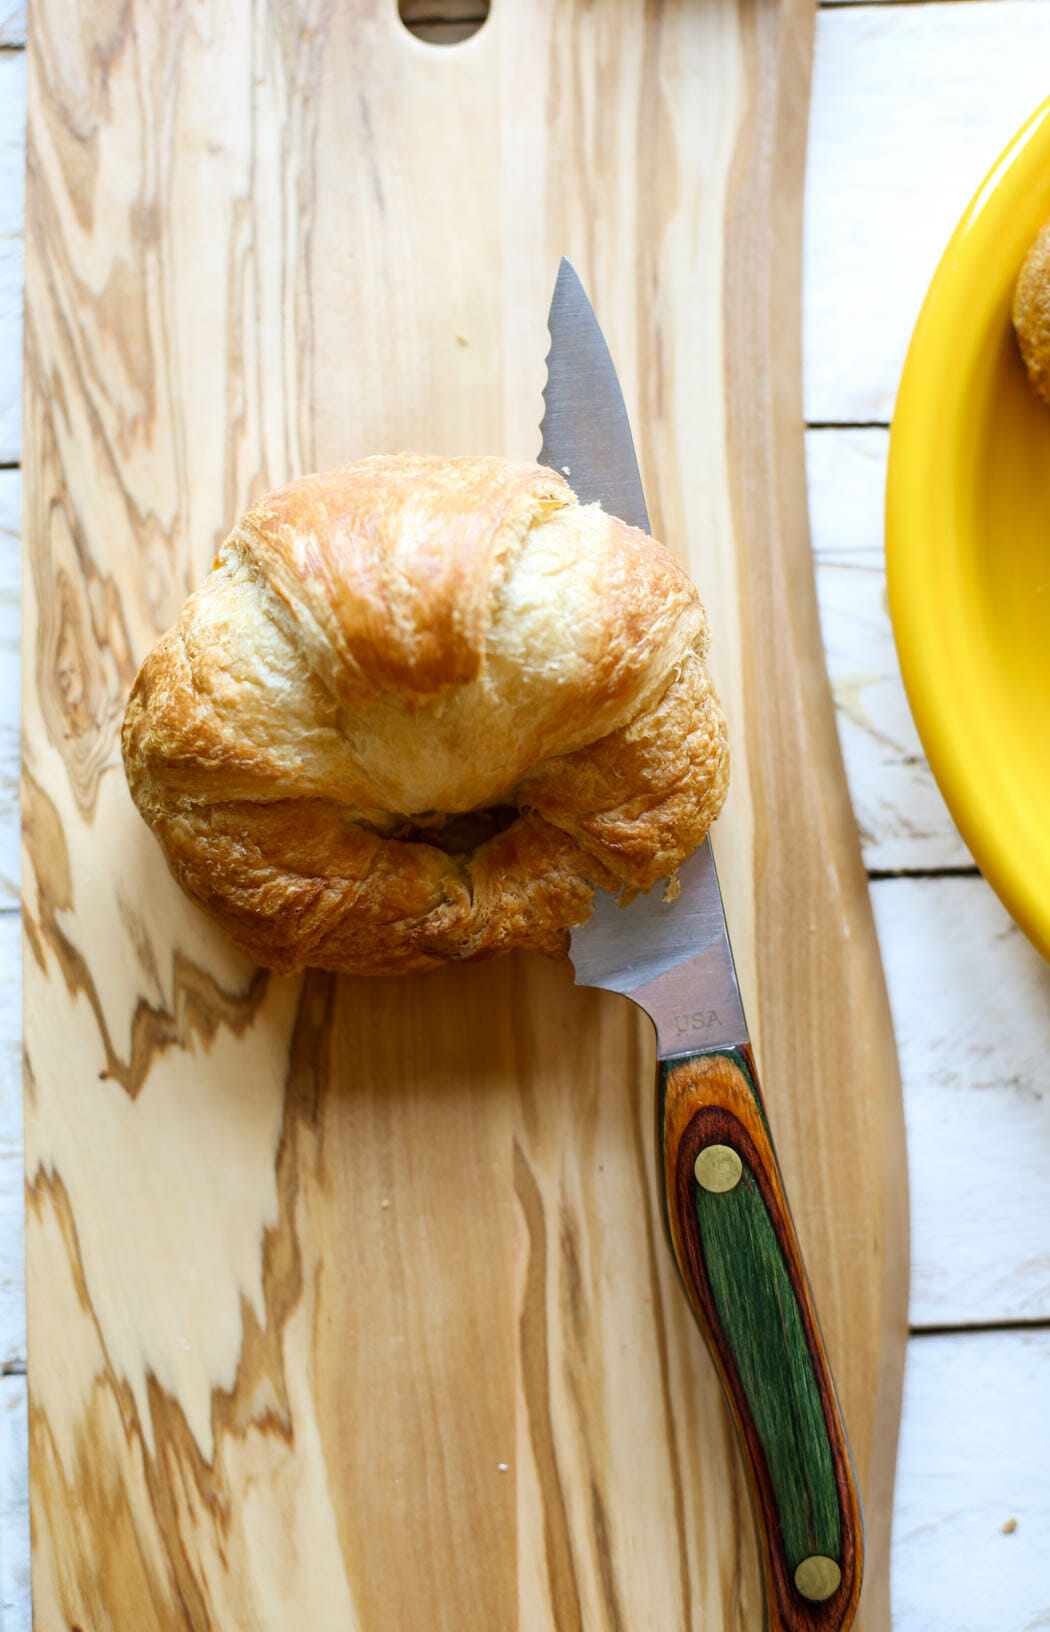 Slicing a croissant